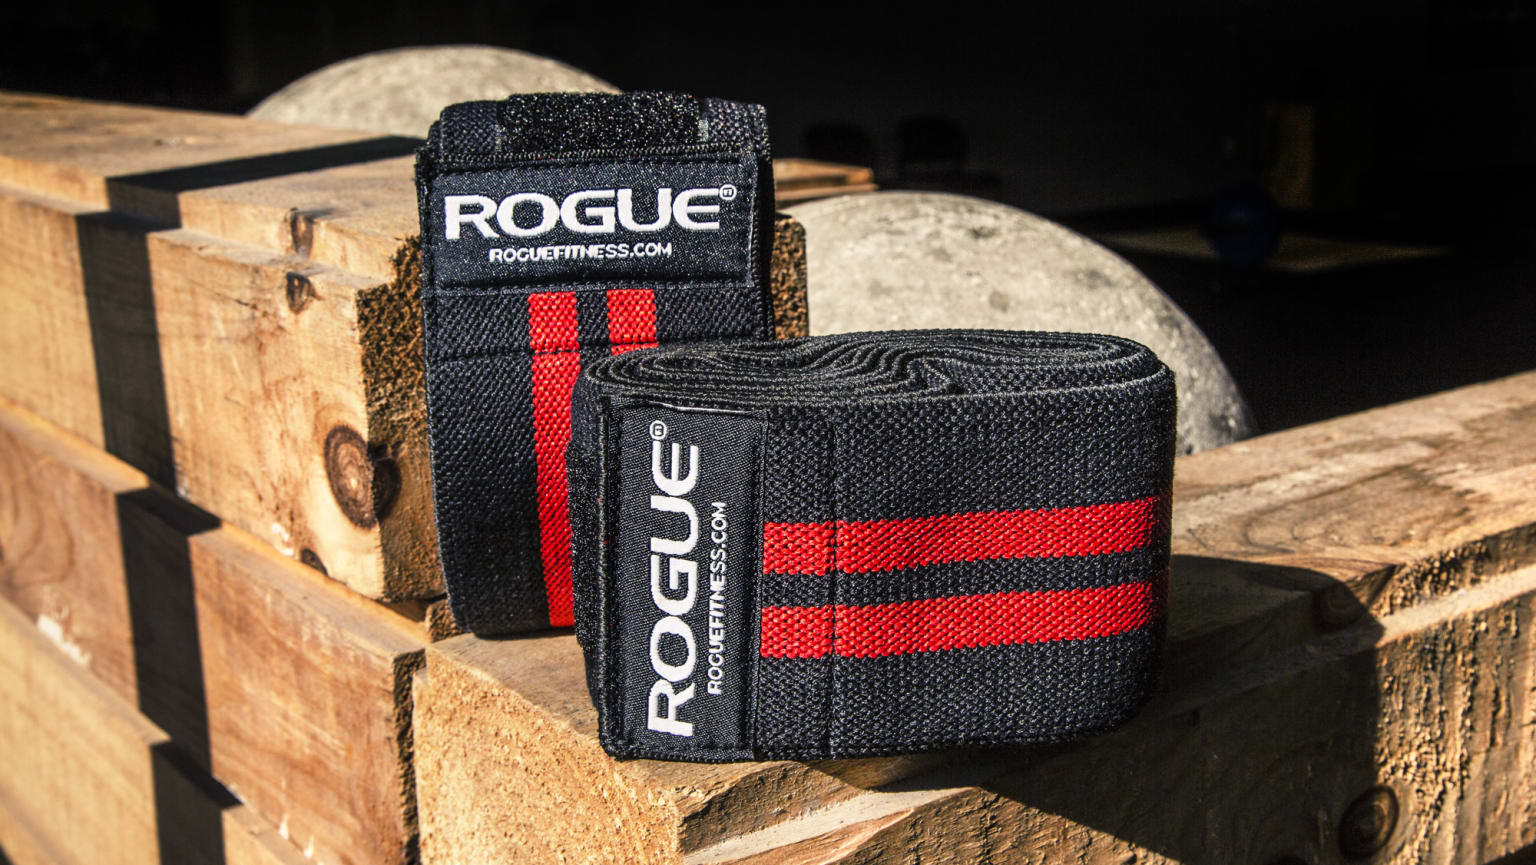 Rogue Knee Wraps - Weightlifting Knee Supports